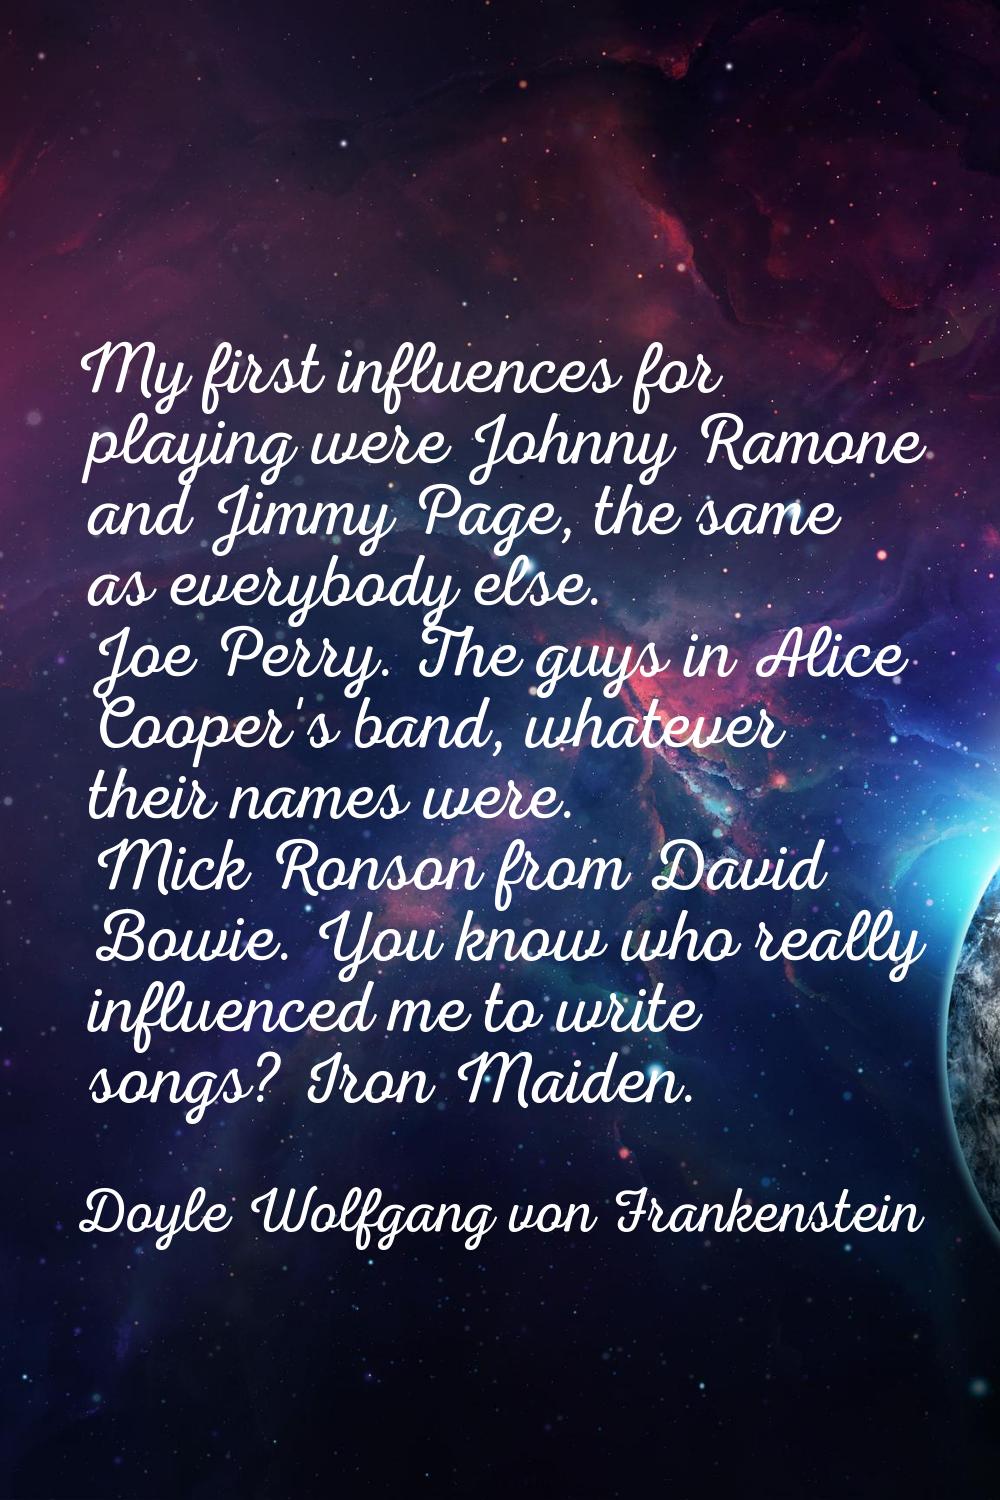 My first influences for playing were Johnny Ramone and Jimmy Page, the same as everybody else. Joe 